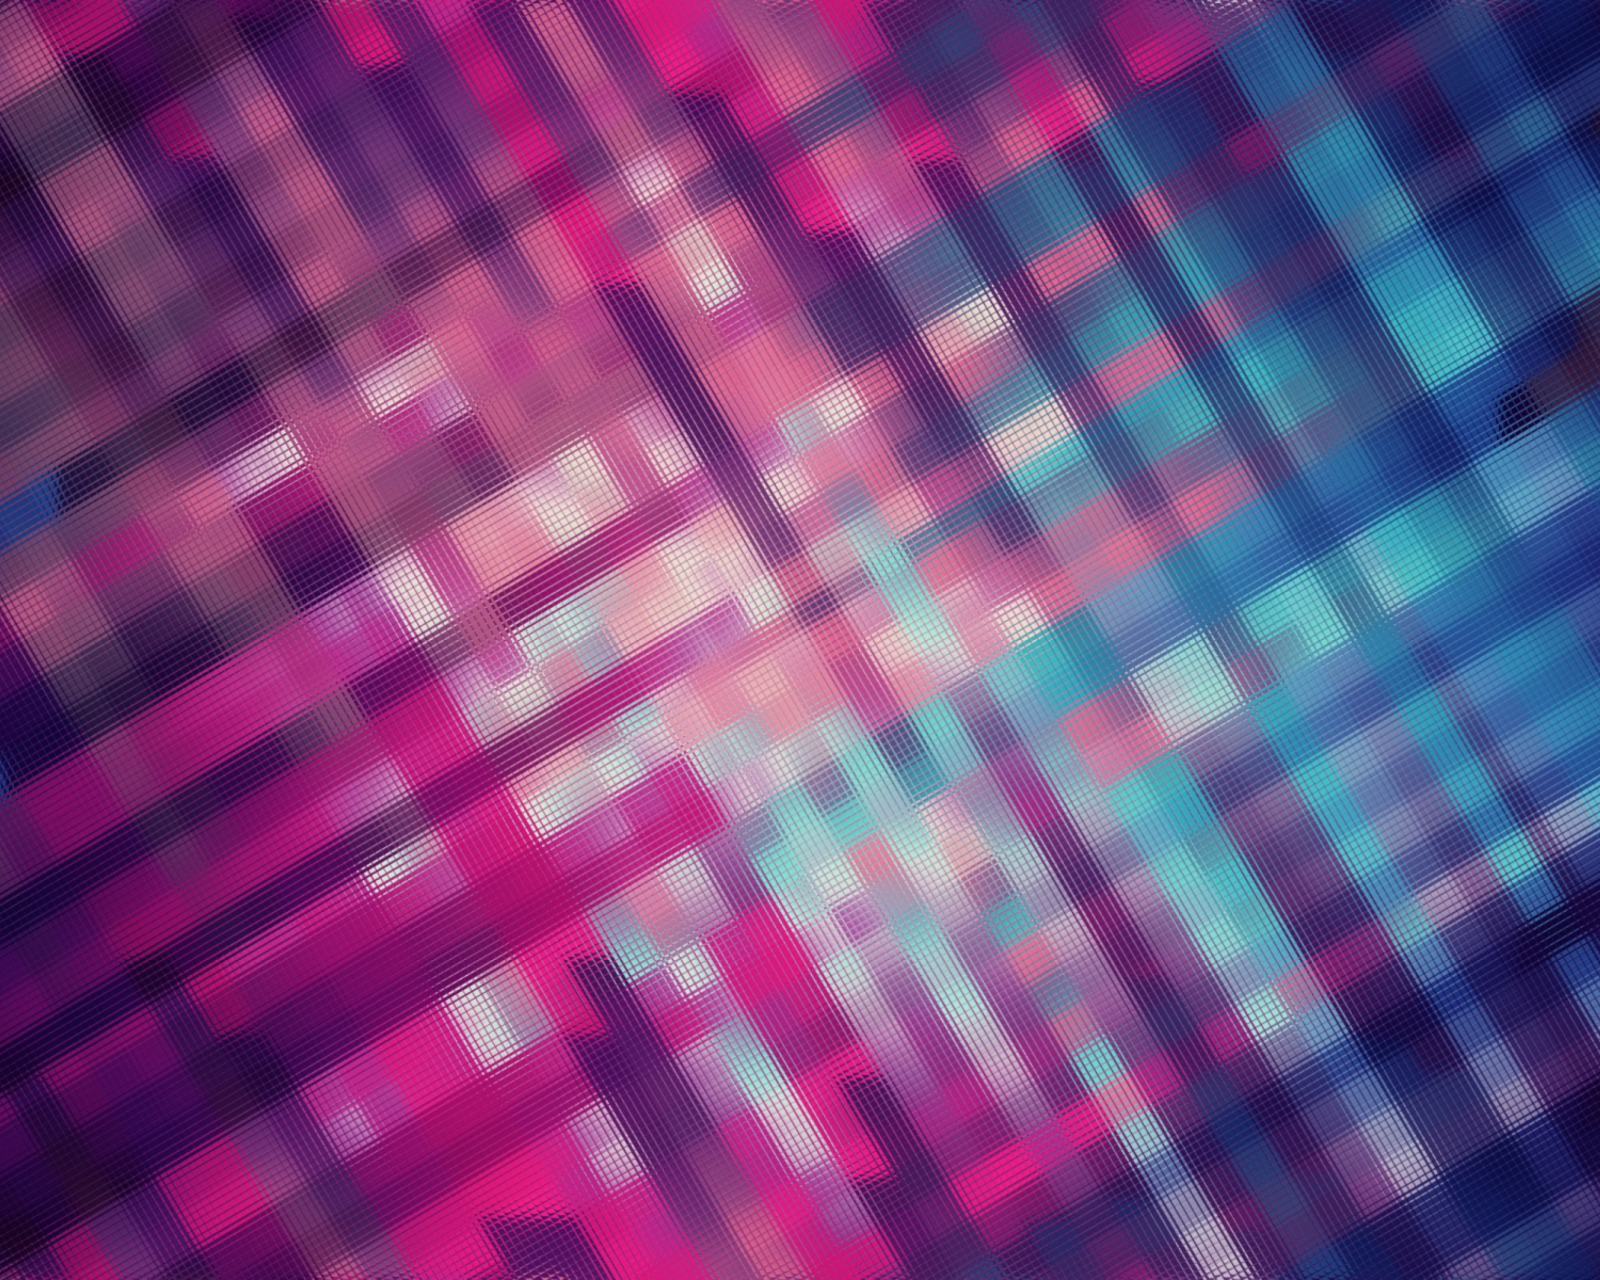 Das Pink And Blue Abstraction Wallpaper 1600x1280